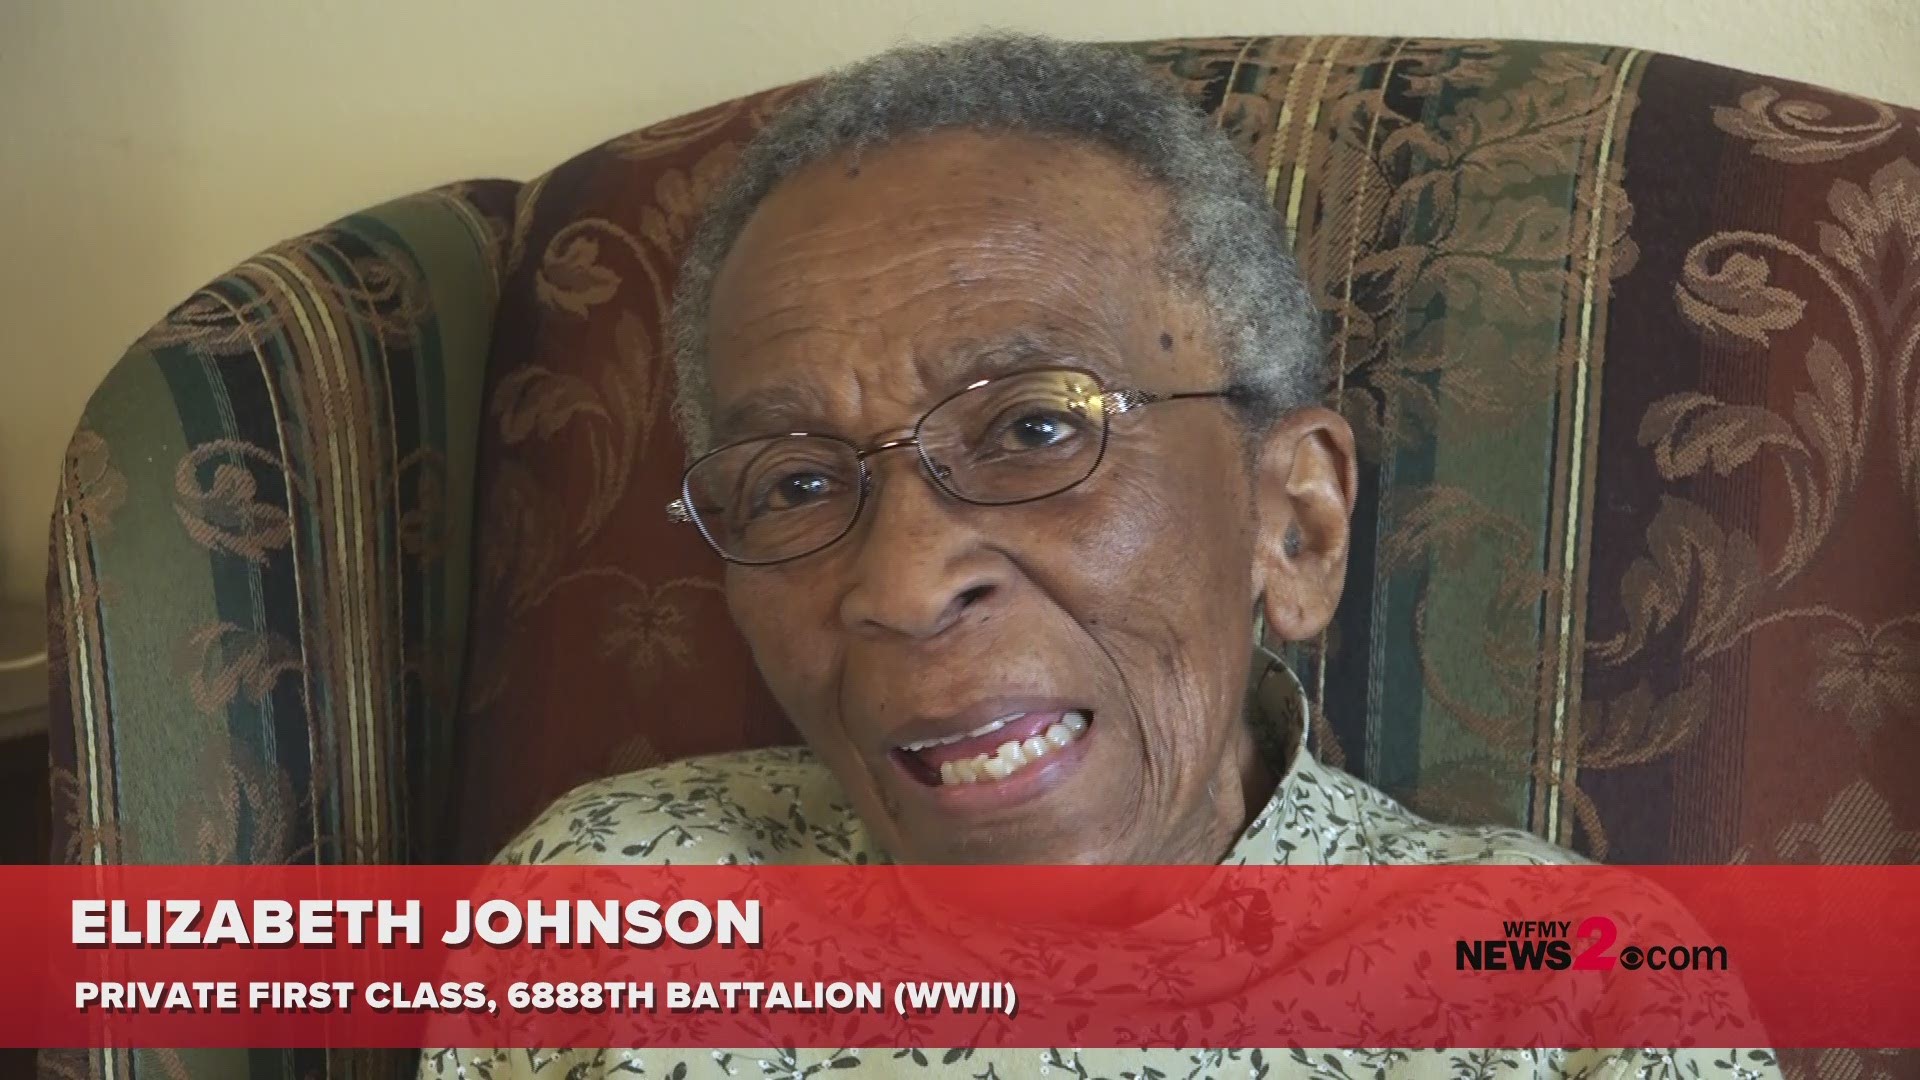 The 6888th battalion was the first and only all-black, all-women battalion in World War II. Private First-Class Elizabeth Johnson of Elkin, N.C. was one of the women in the battalion and one of the few still living today.